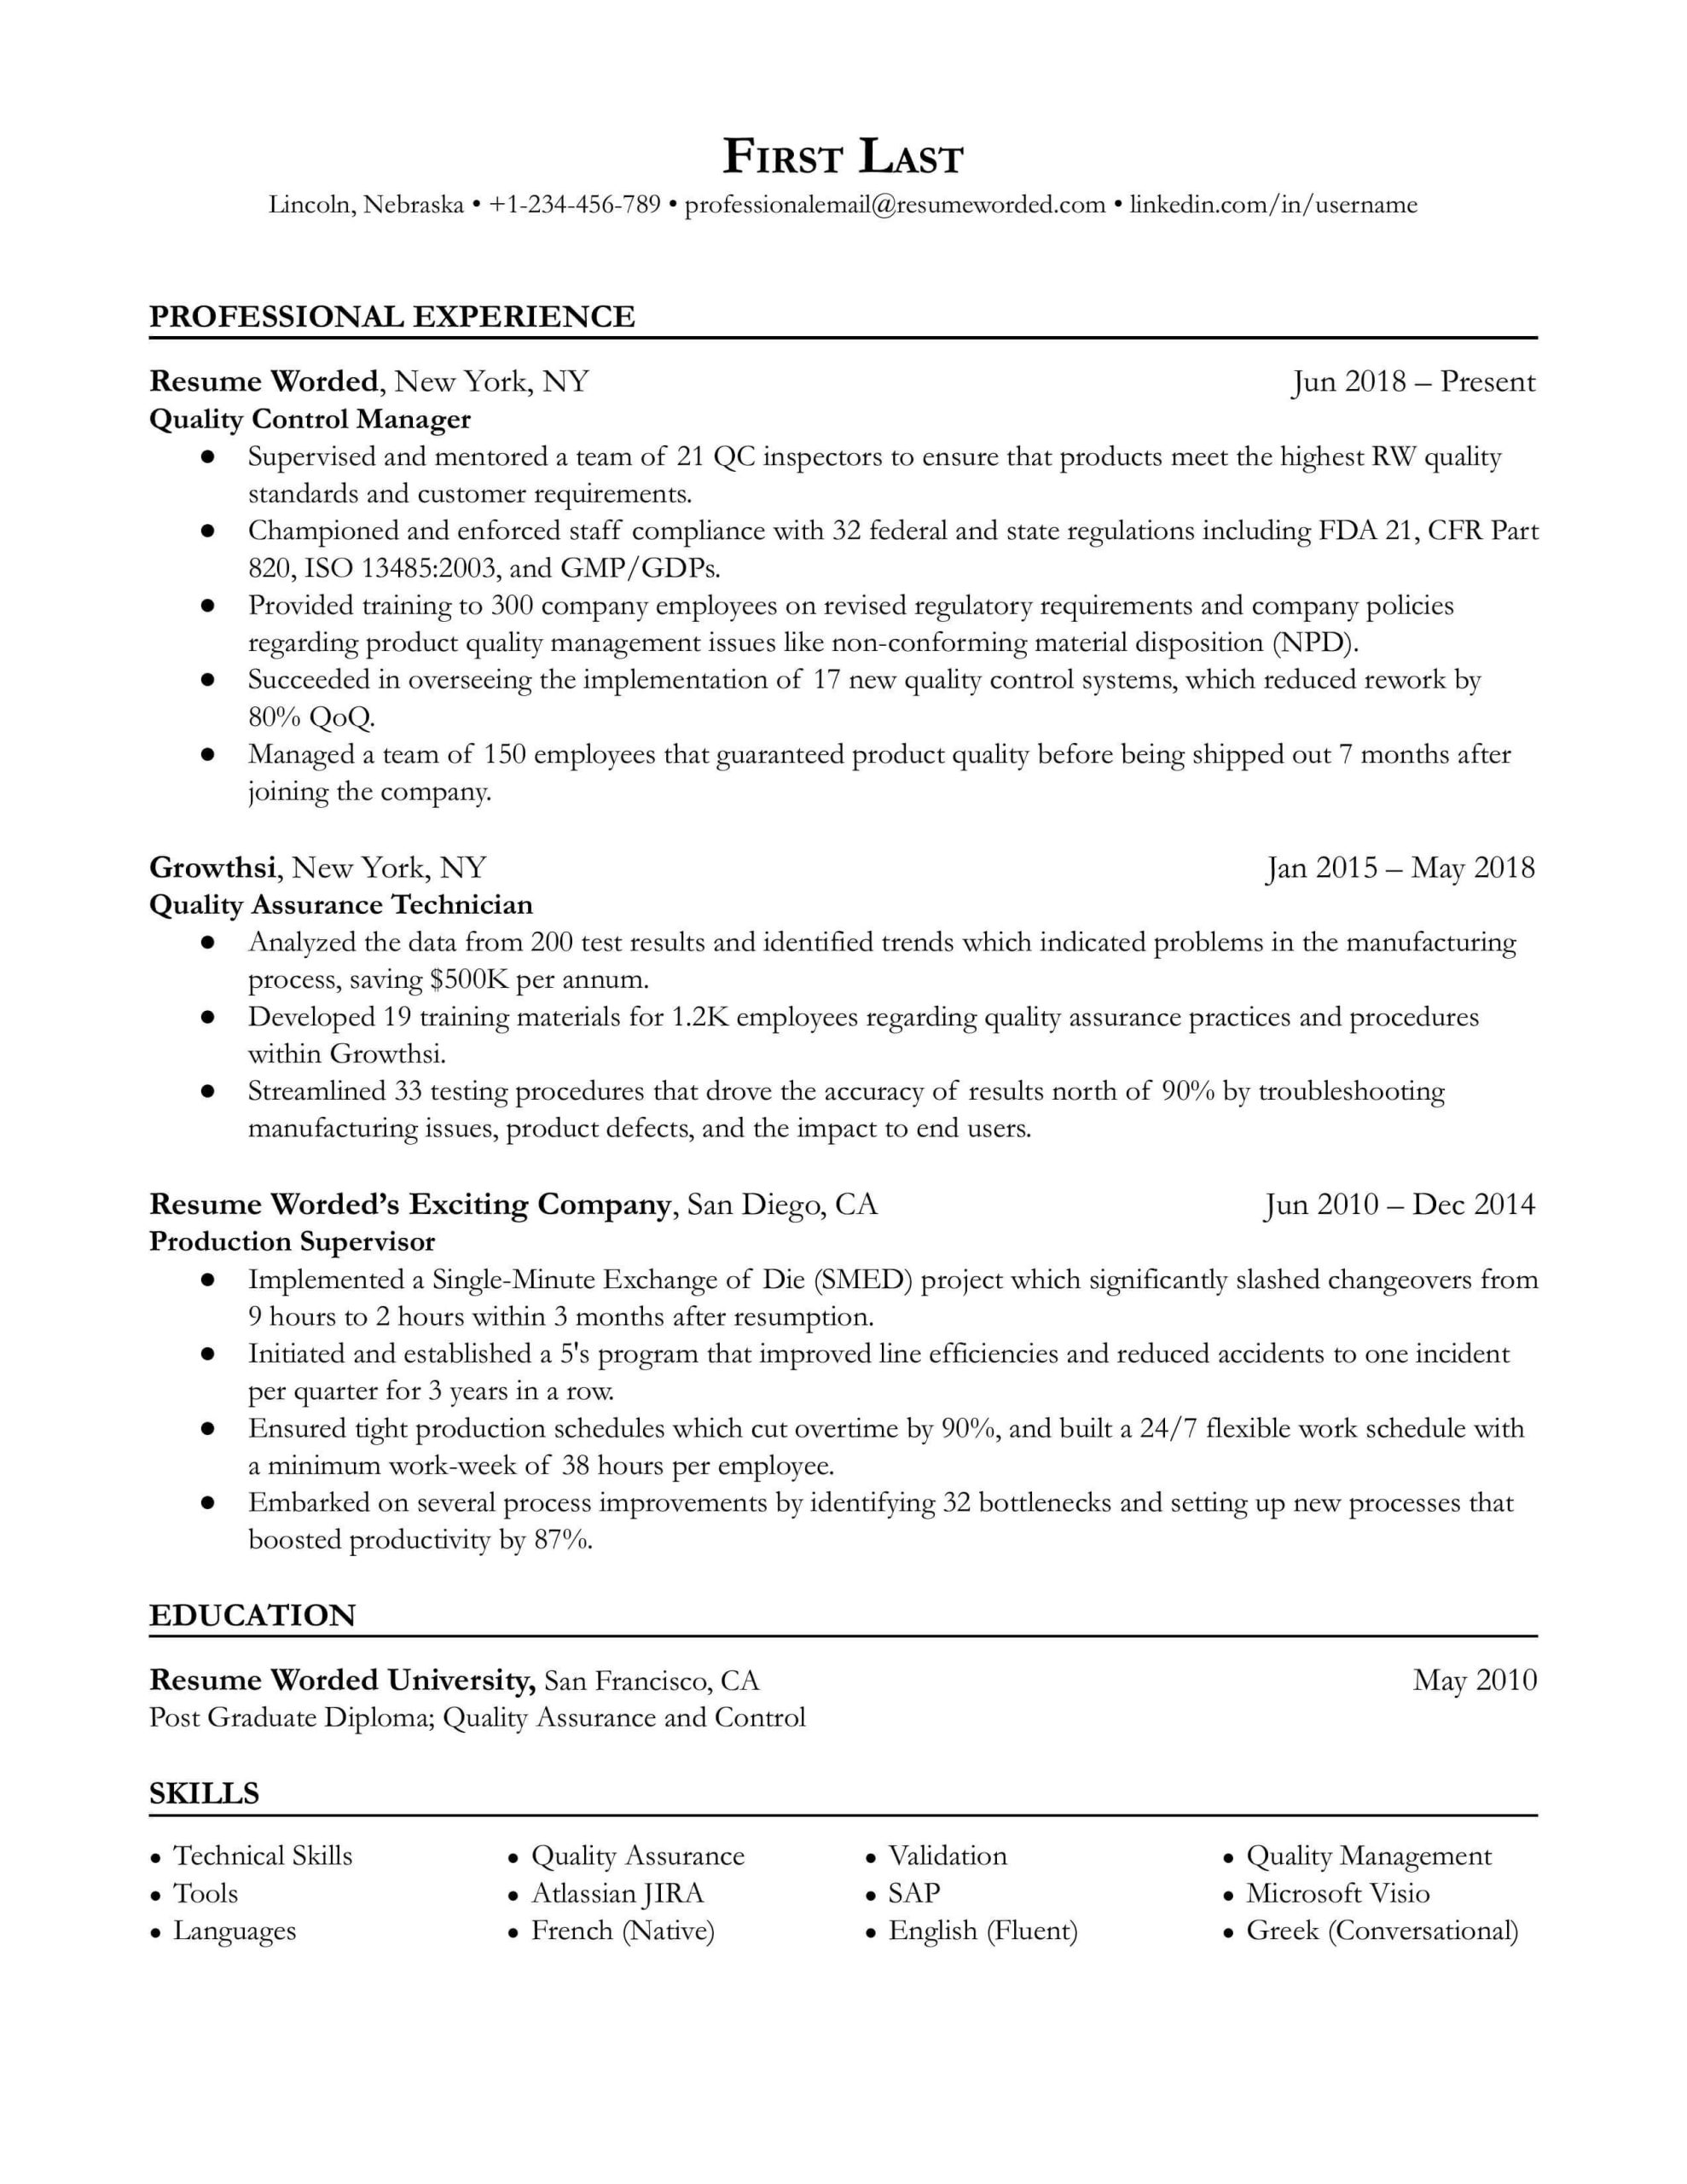 Sample Resume for Quality Control Officer Quality Control Manager Resume Example for 2022 Resume Worded